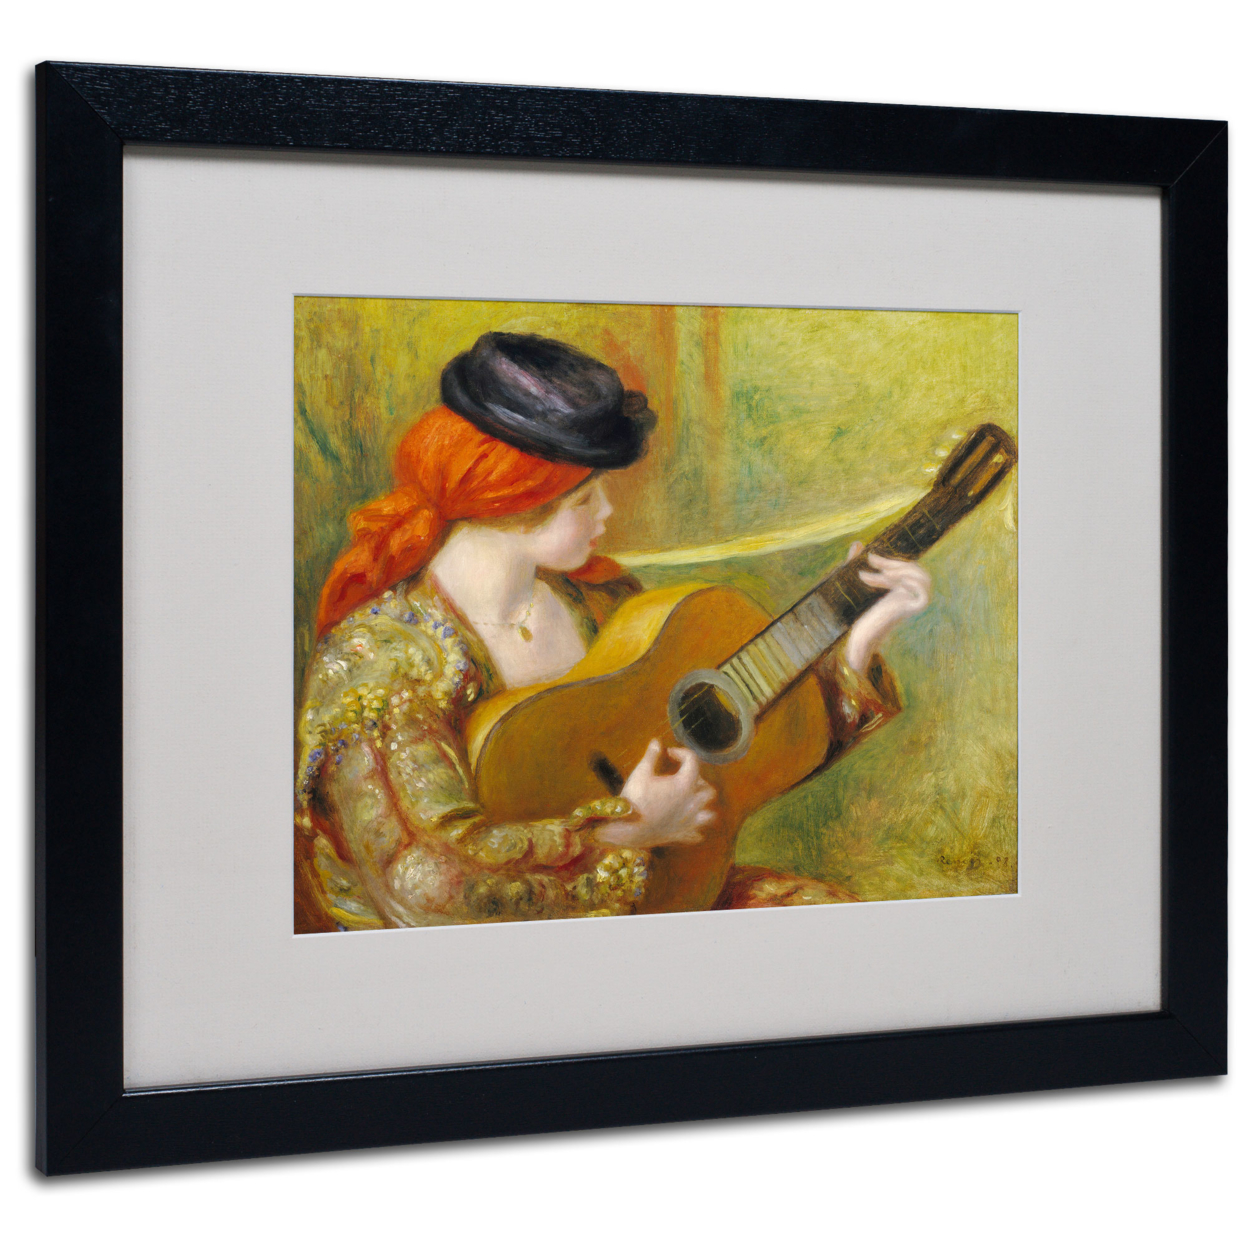 Pierre Renoir 'Young Spanish Woman' Black Wooden Framed Art 18 X 22 Inches